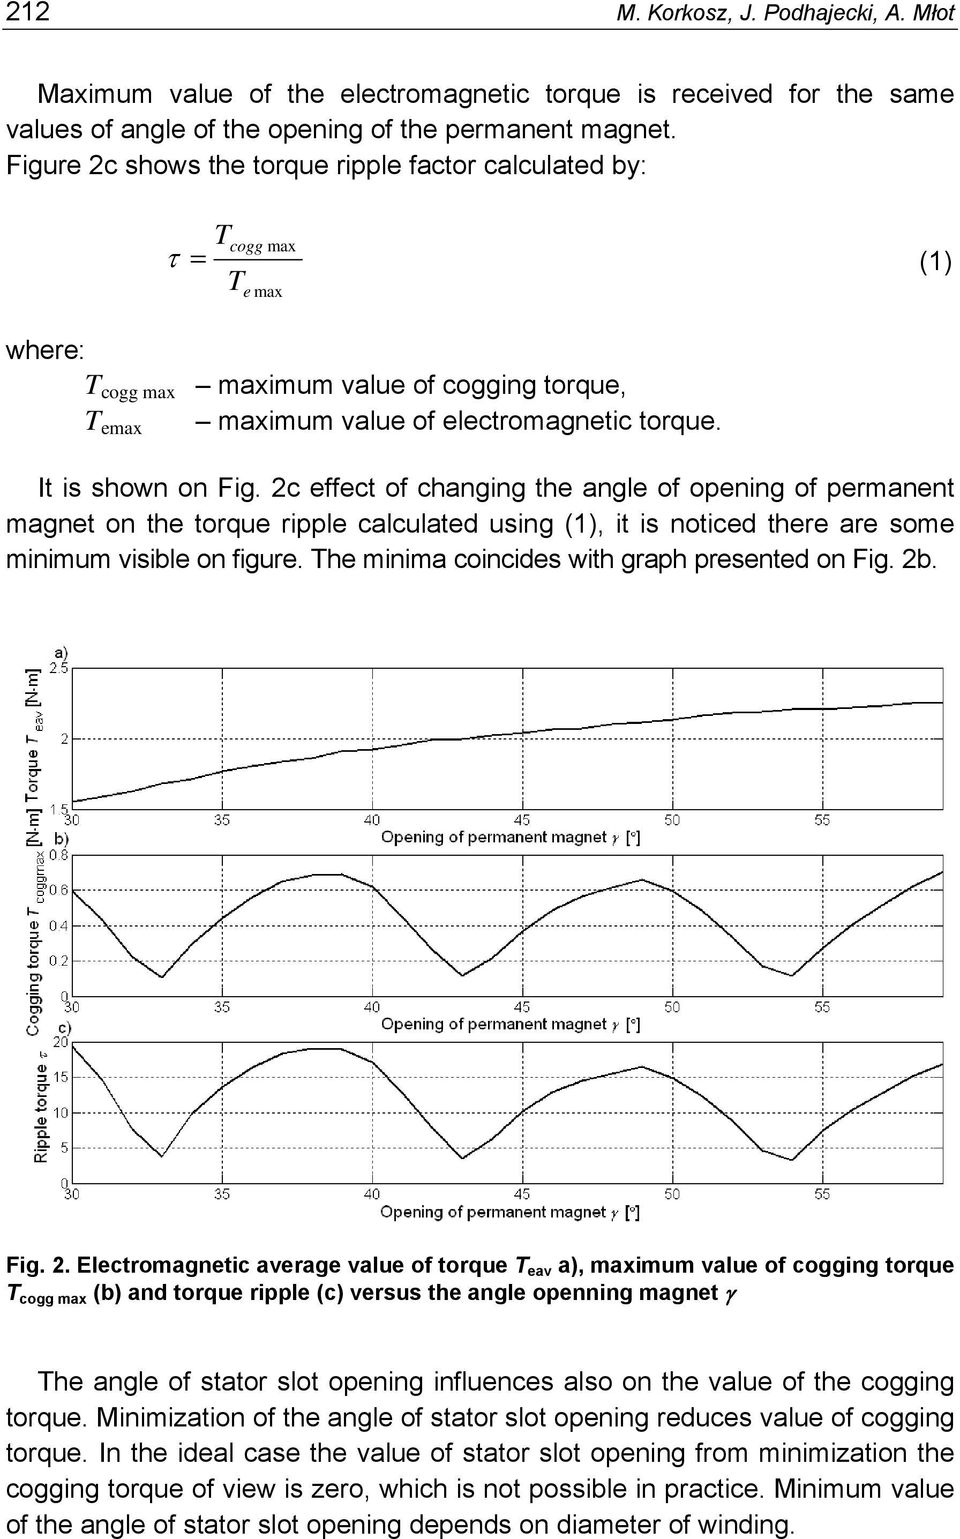 2c effect of changing the angle of opening of permanent magnet on the torque ripple calculated using (1), it is noticed there are some minimum visible on figure.